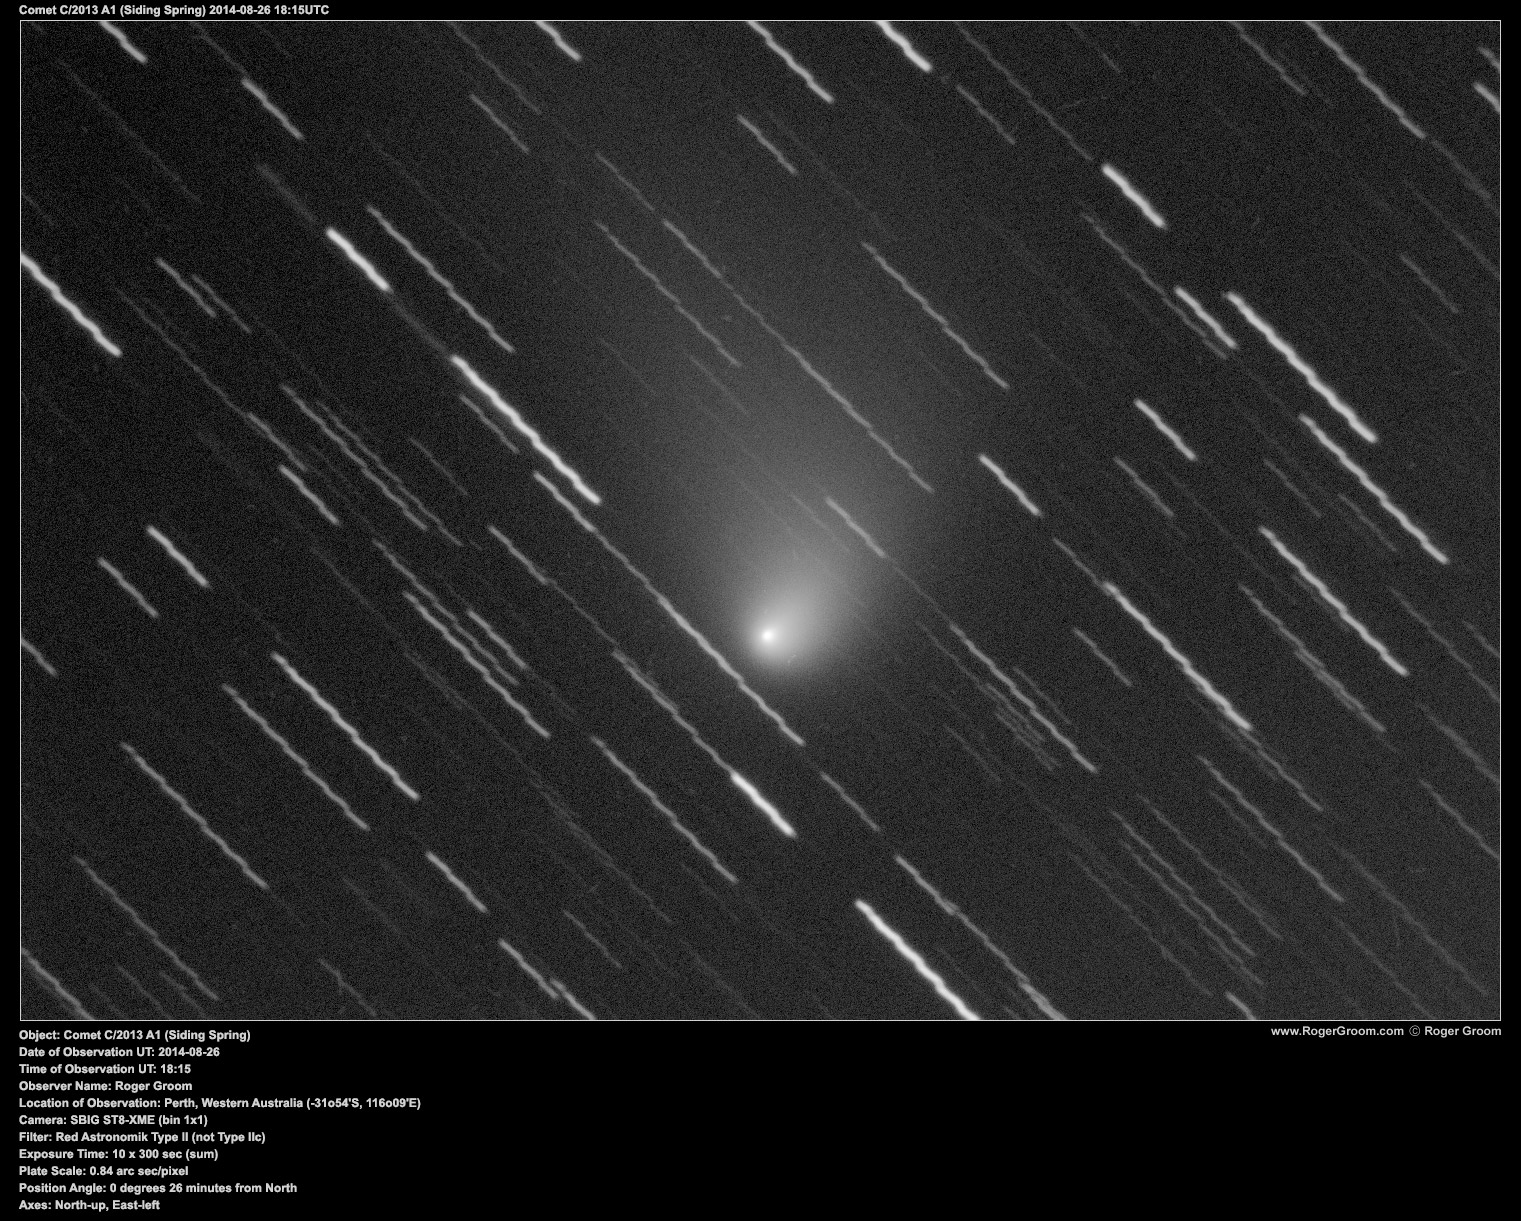 Object: Comet C/2013 A1 (Siding Spring) Date of Observation UT: 2014-08-26 Time of Observation UT: 18:15 Observer Name: Roger Groom Location of Observation: Perth, Western Australia (-31o54'S, 116o09'E) Camera: SBIG ST8-XME (bin 1x1) Filter: Red Astronomik Type II (not Type IIc) Exposure Time: 10 x 300 sec (sum) Plate Scale: 0.84 arc sec/pixel Position Angle: 0 degrees 26 minutes from North Axes: North-up, East-left